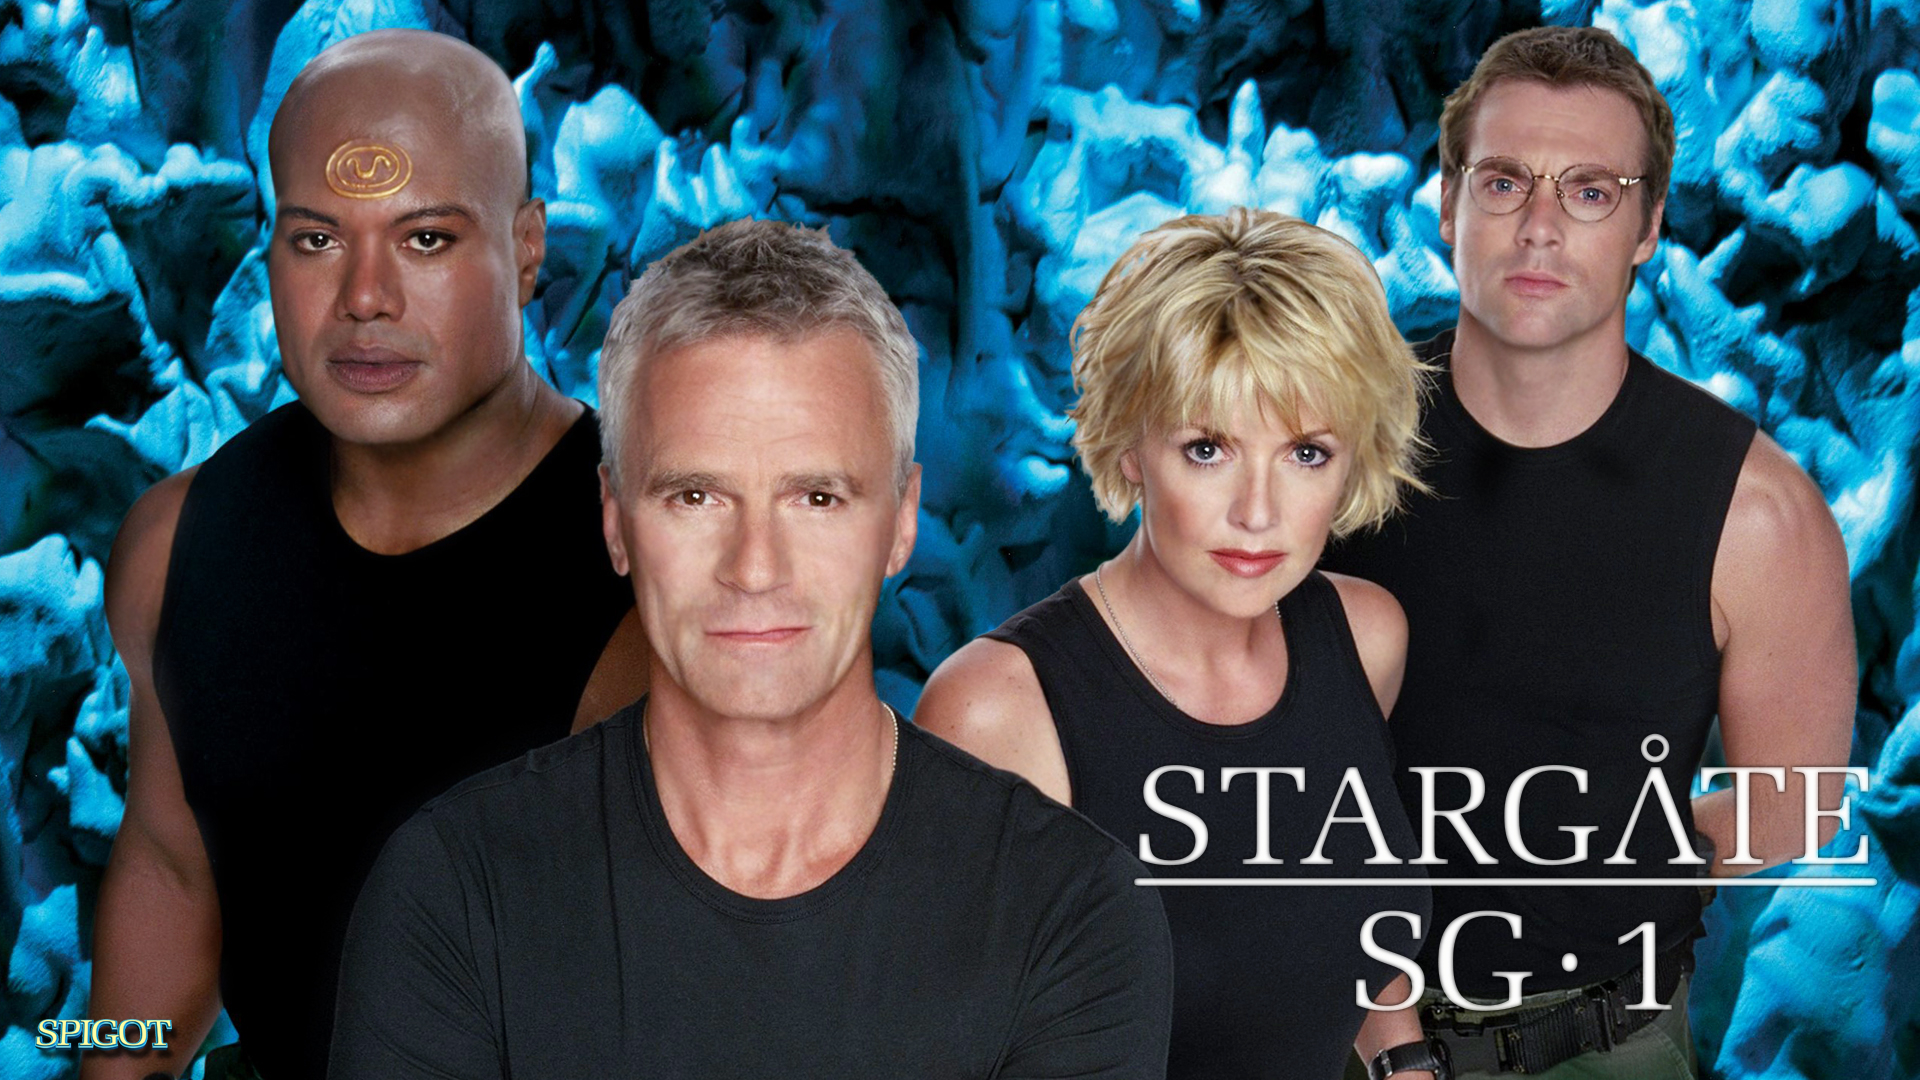 1920x1080 Stargate SG1 Wallpaper Yes Another One :) | George Spigot's Blog